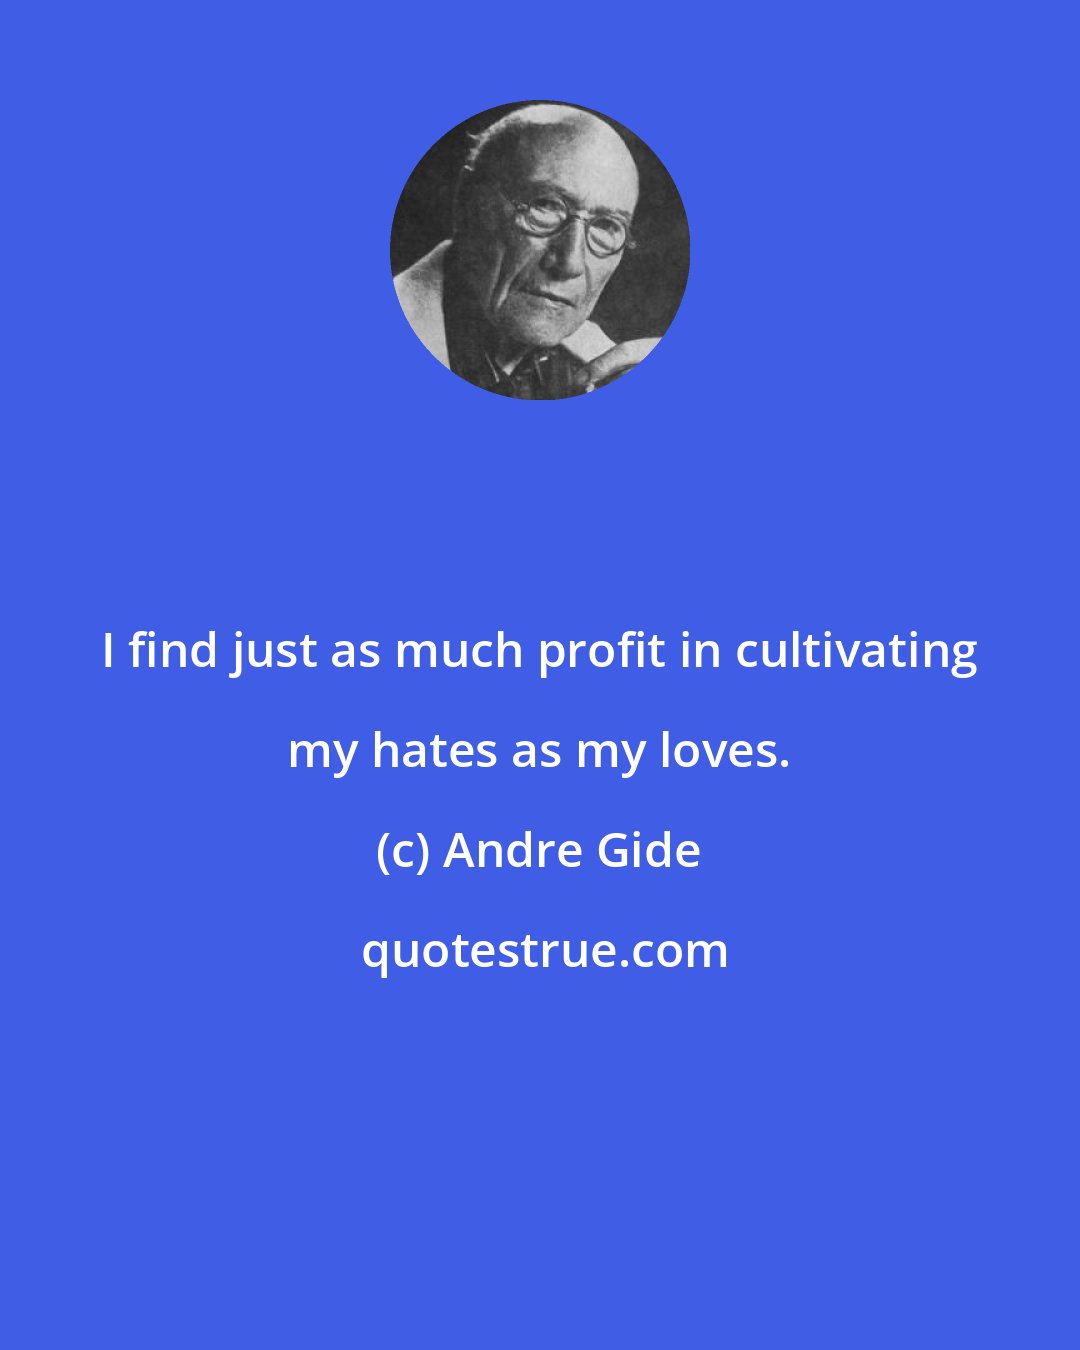 Andre Gide: I find just as much profit in cultivating my hates as my loves.